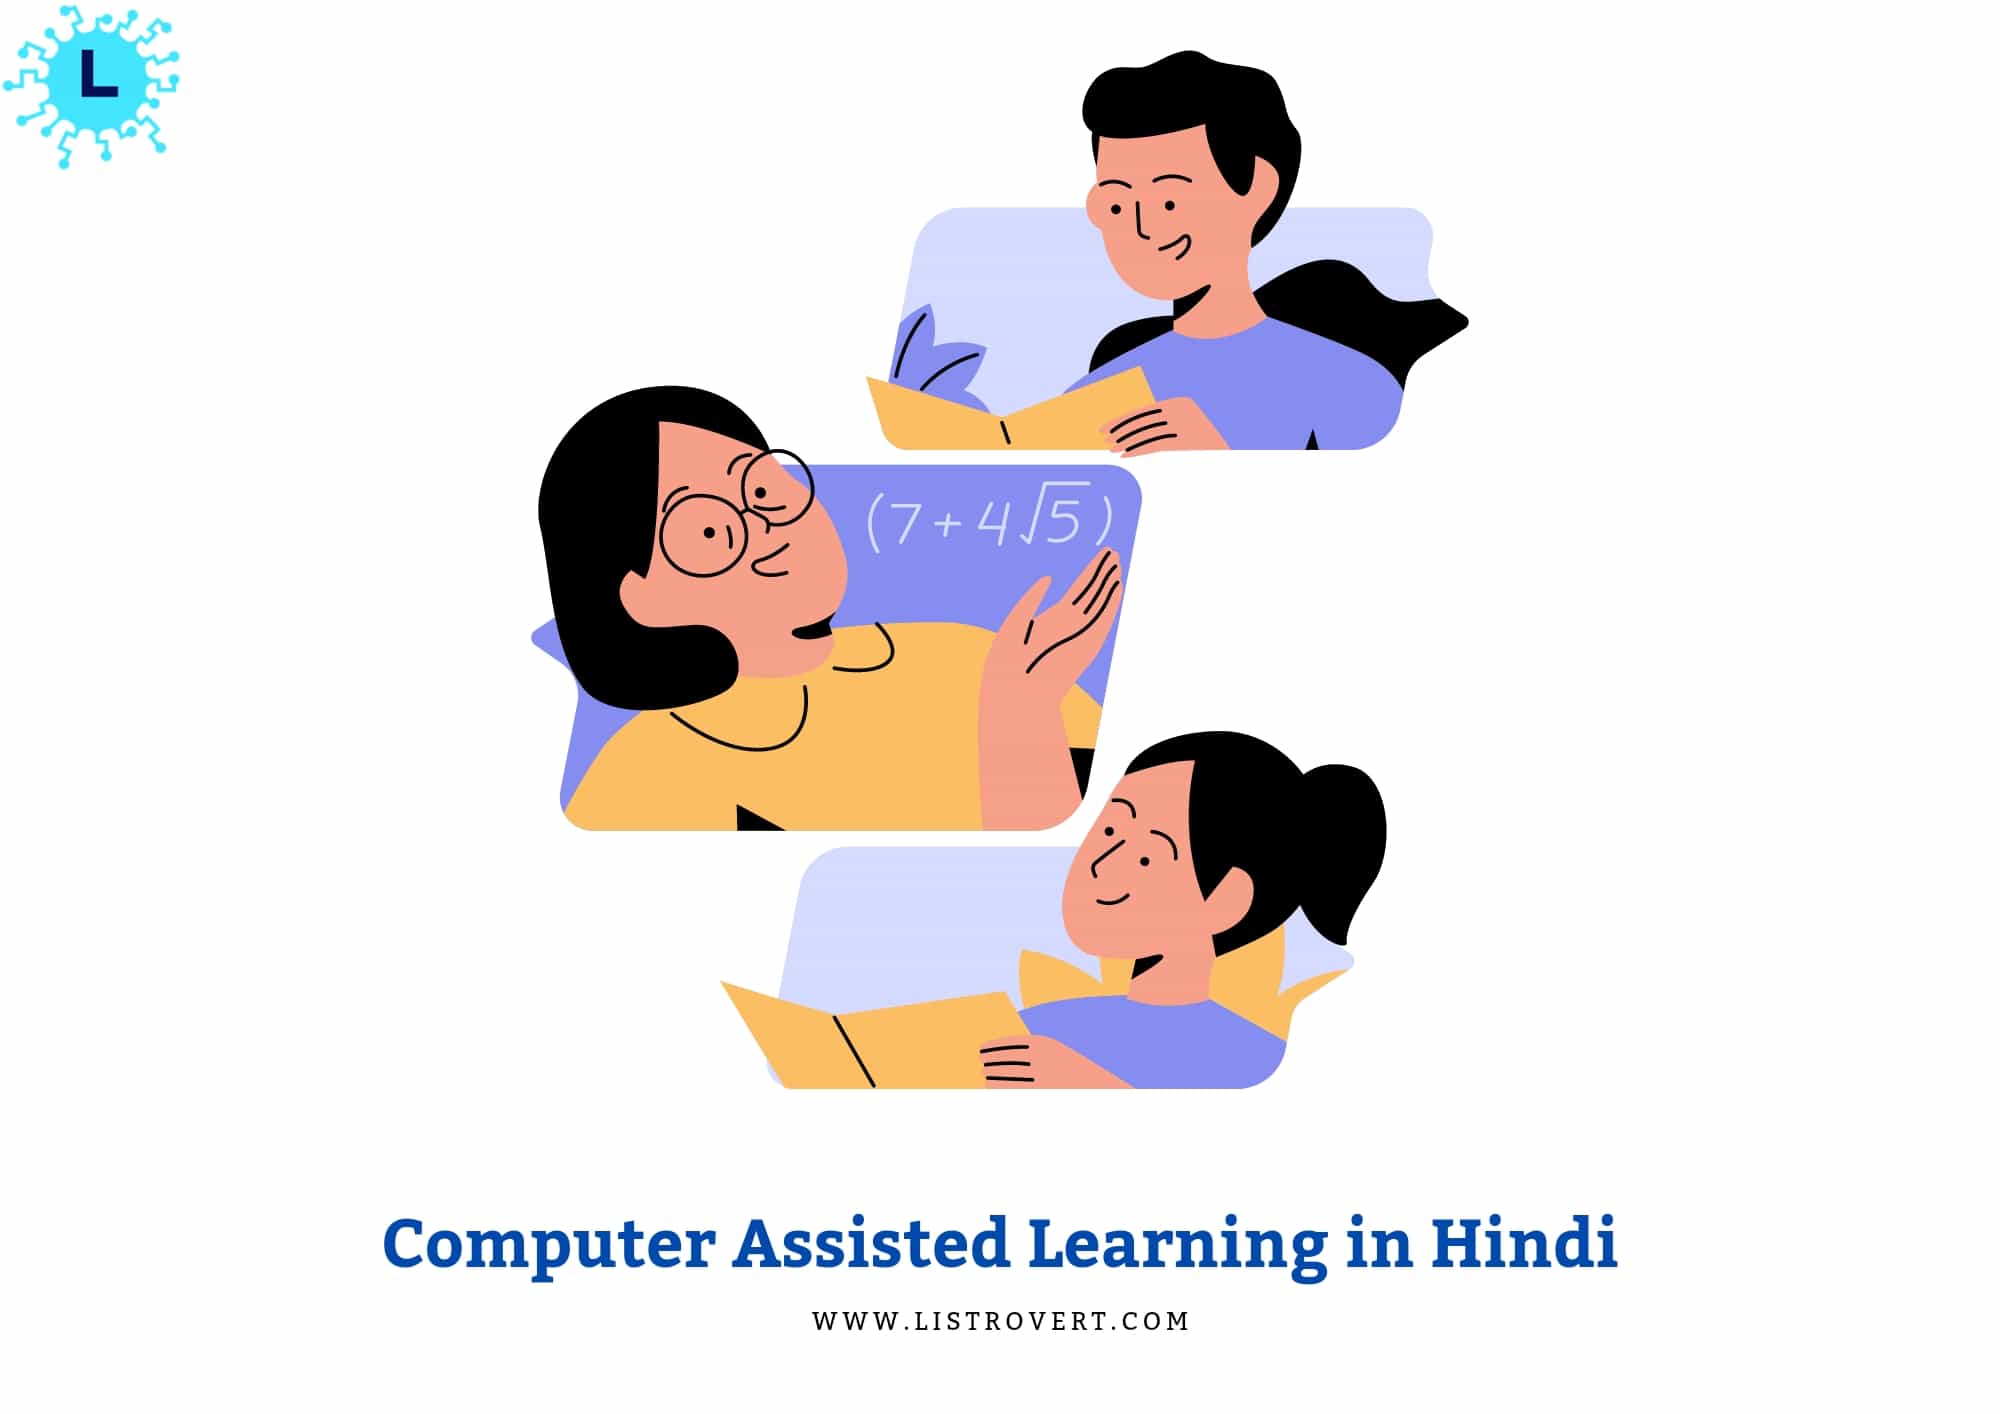 Computer Assisted Learning in Hindi